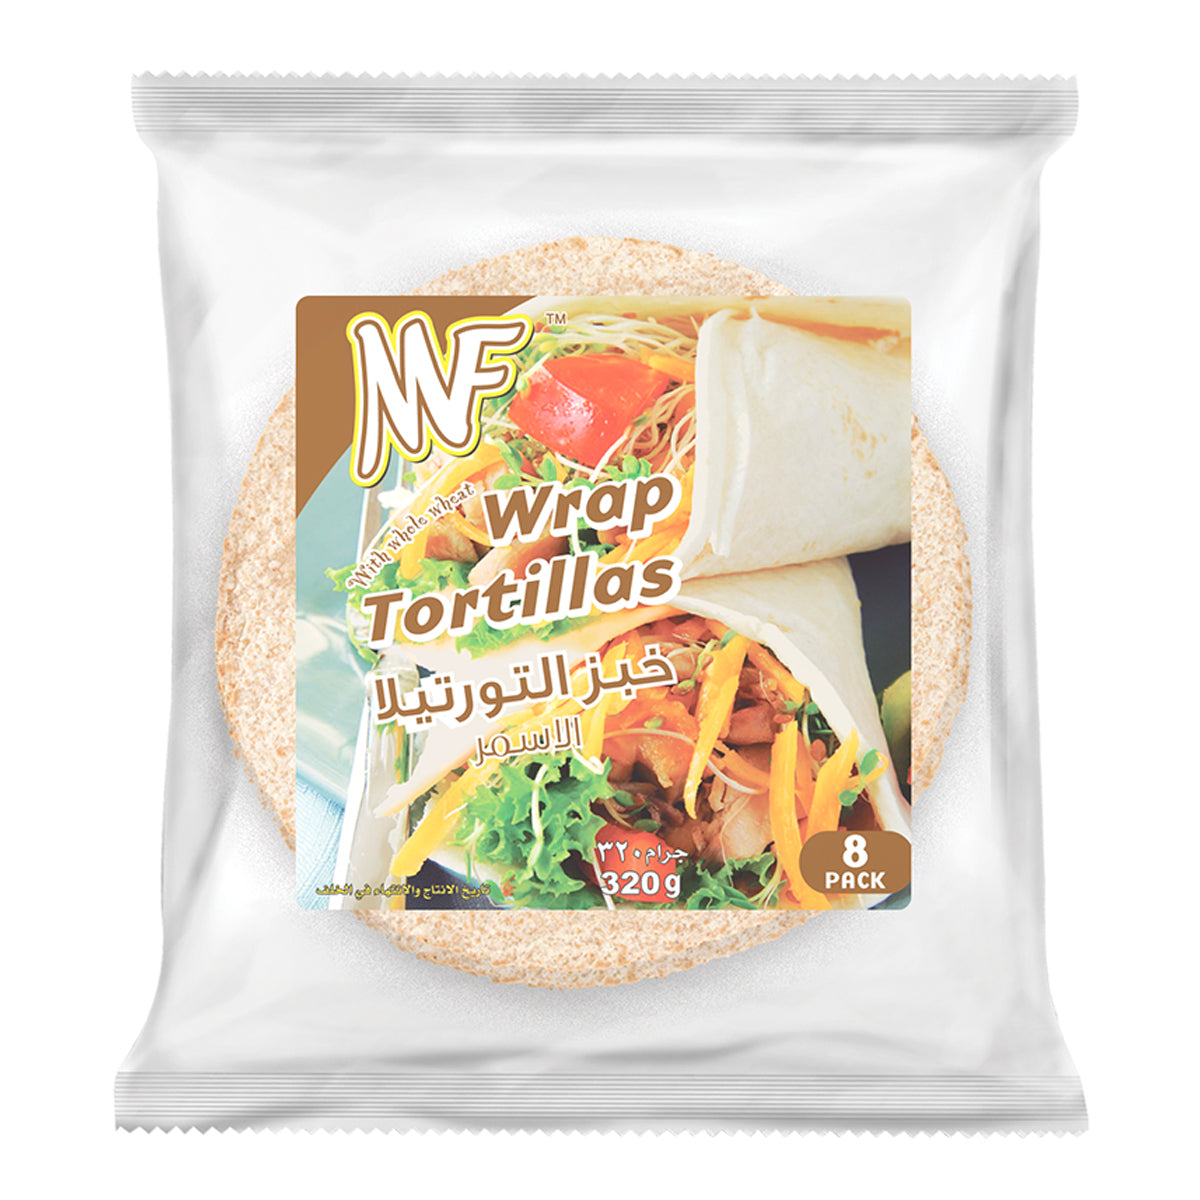 MF Wrap Tortillas With Whole Wheat 320g